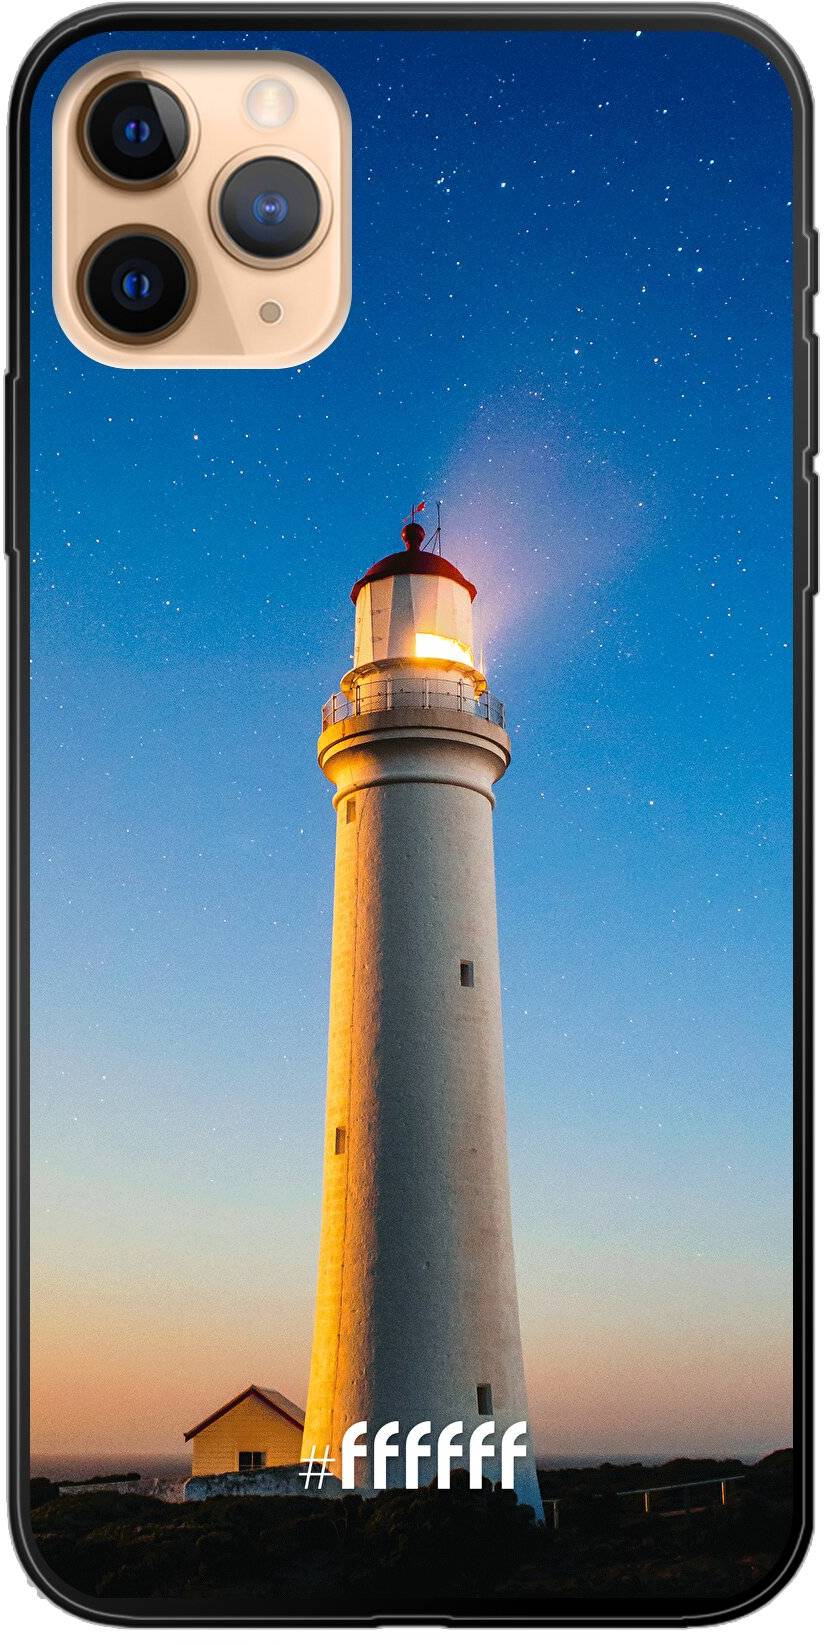 Lighthouse iPhone 11 Pro Max